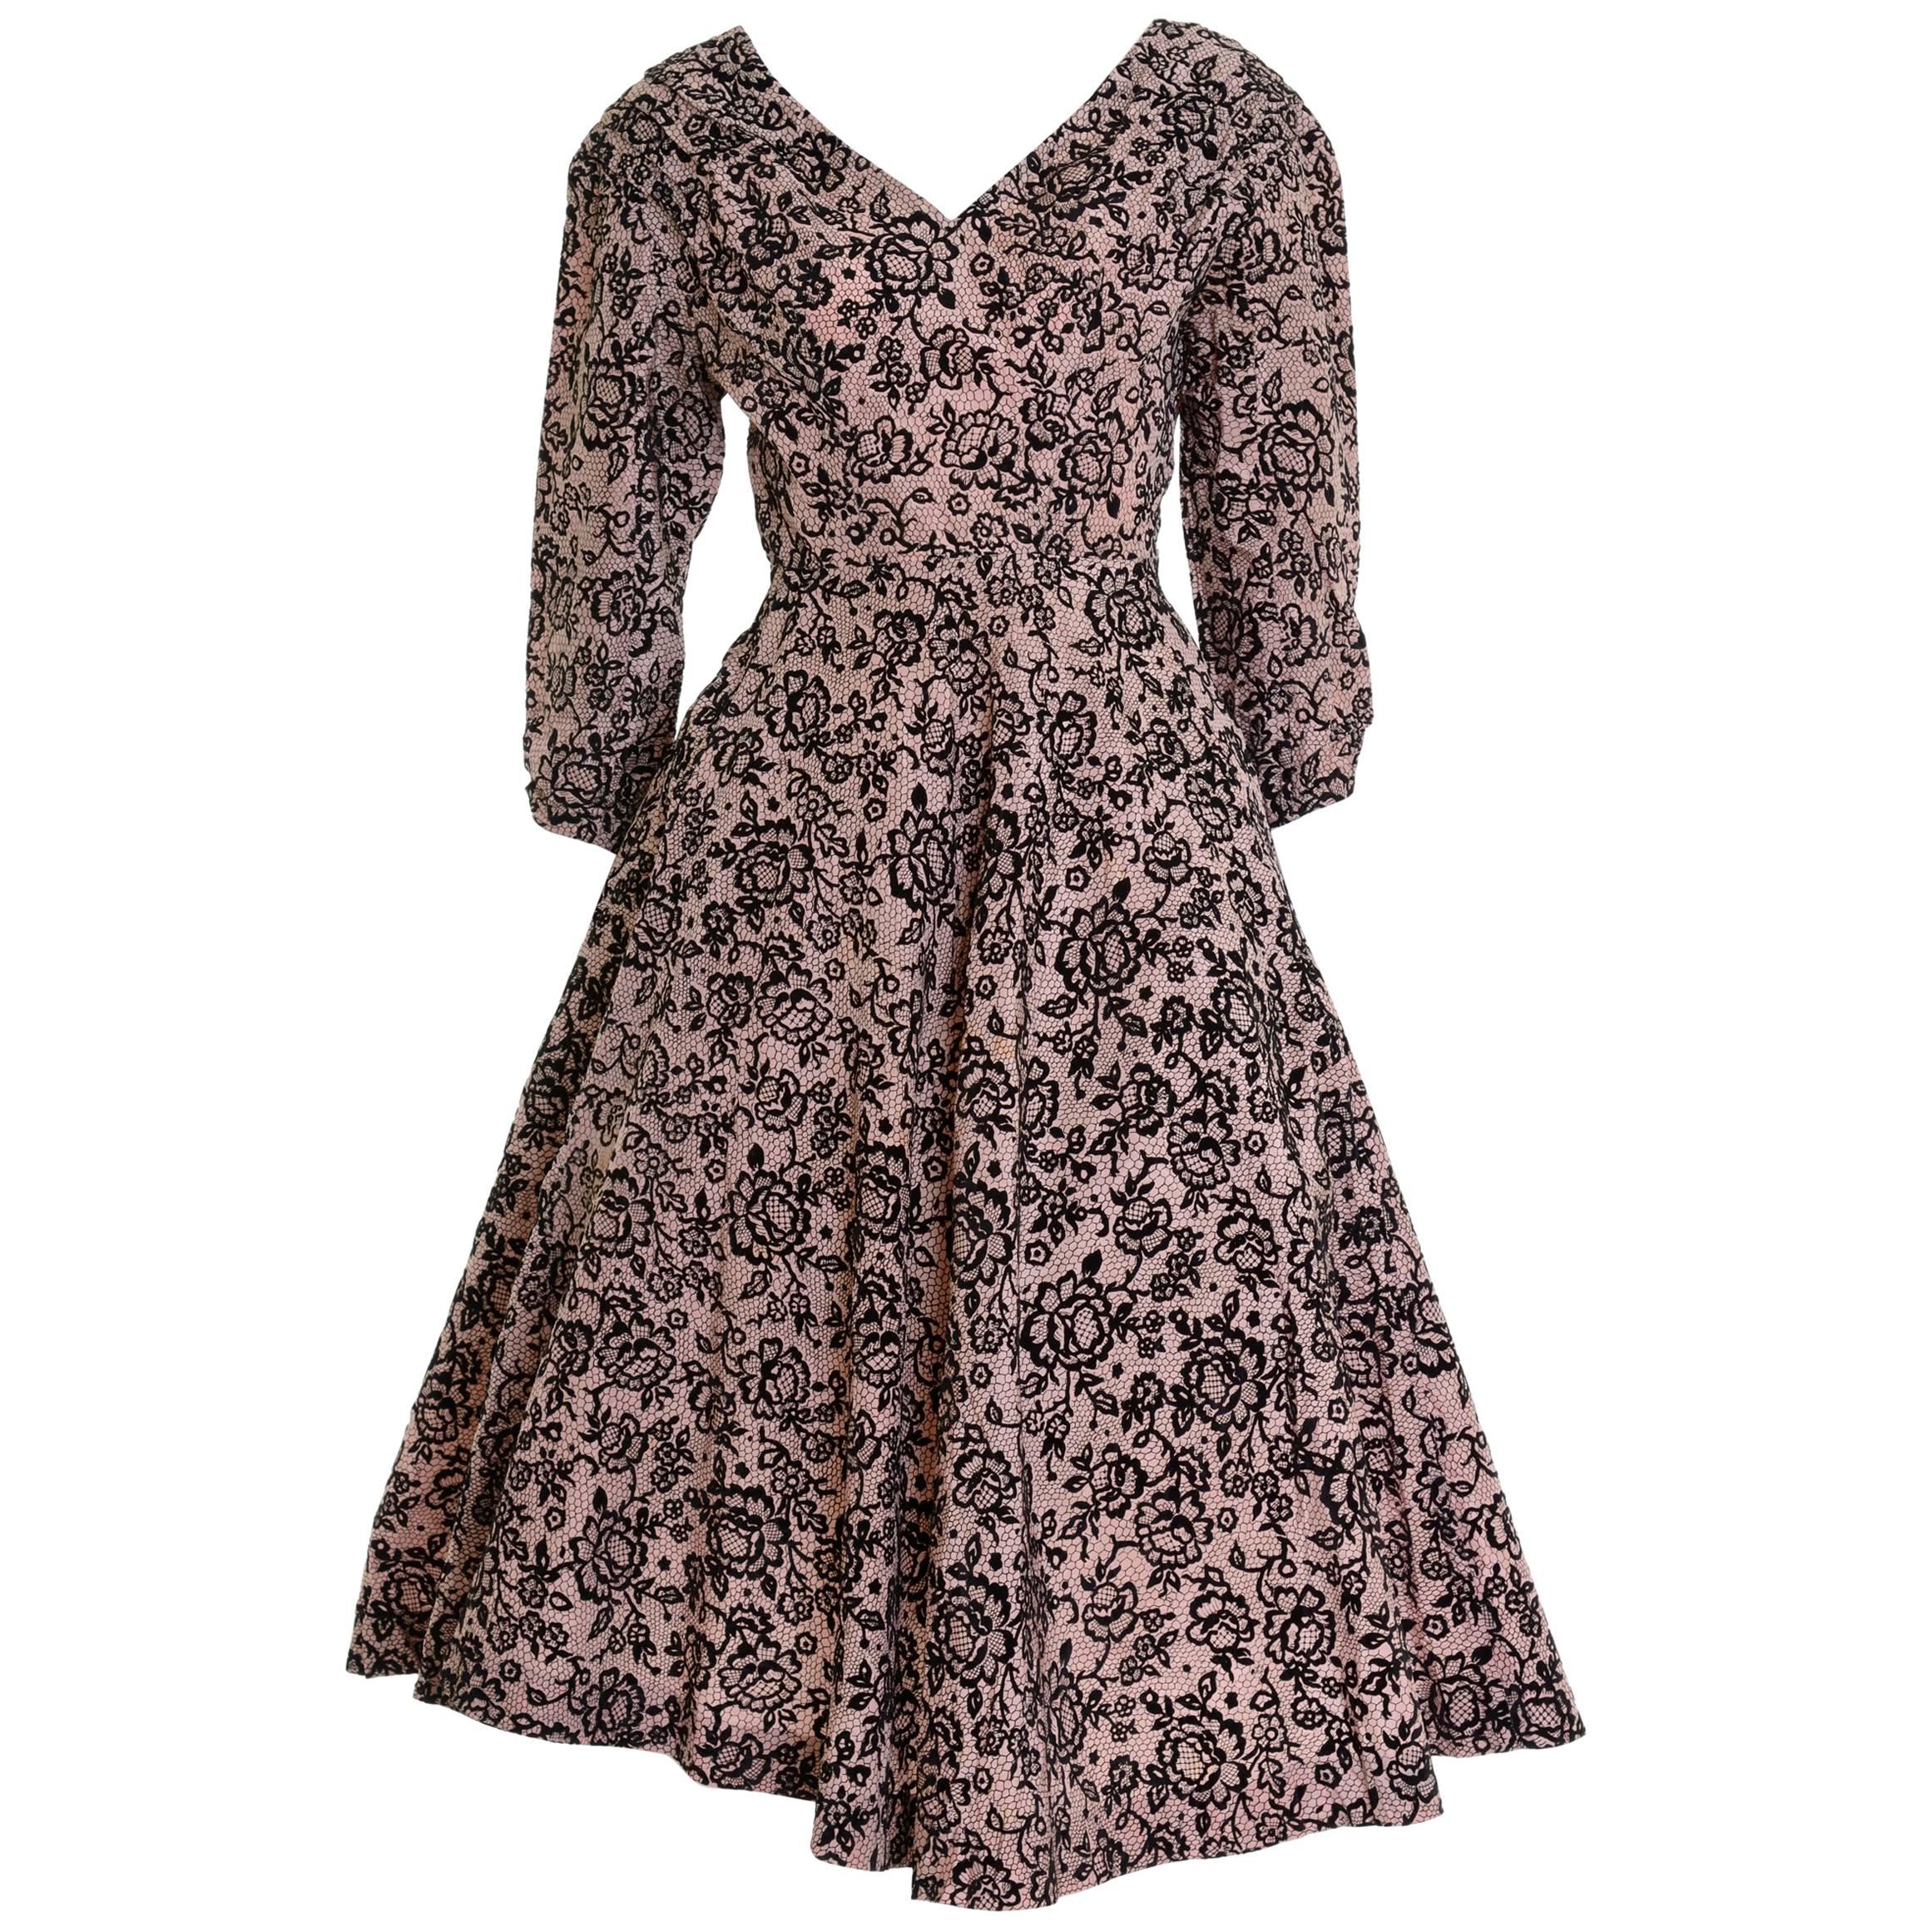 1950s Vintage Black and Powder Pink Brocade Cocktail New Look Circle Dress For Sale